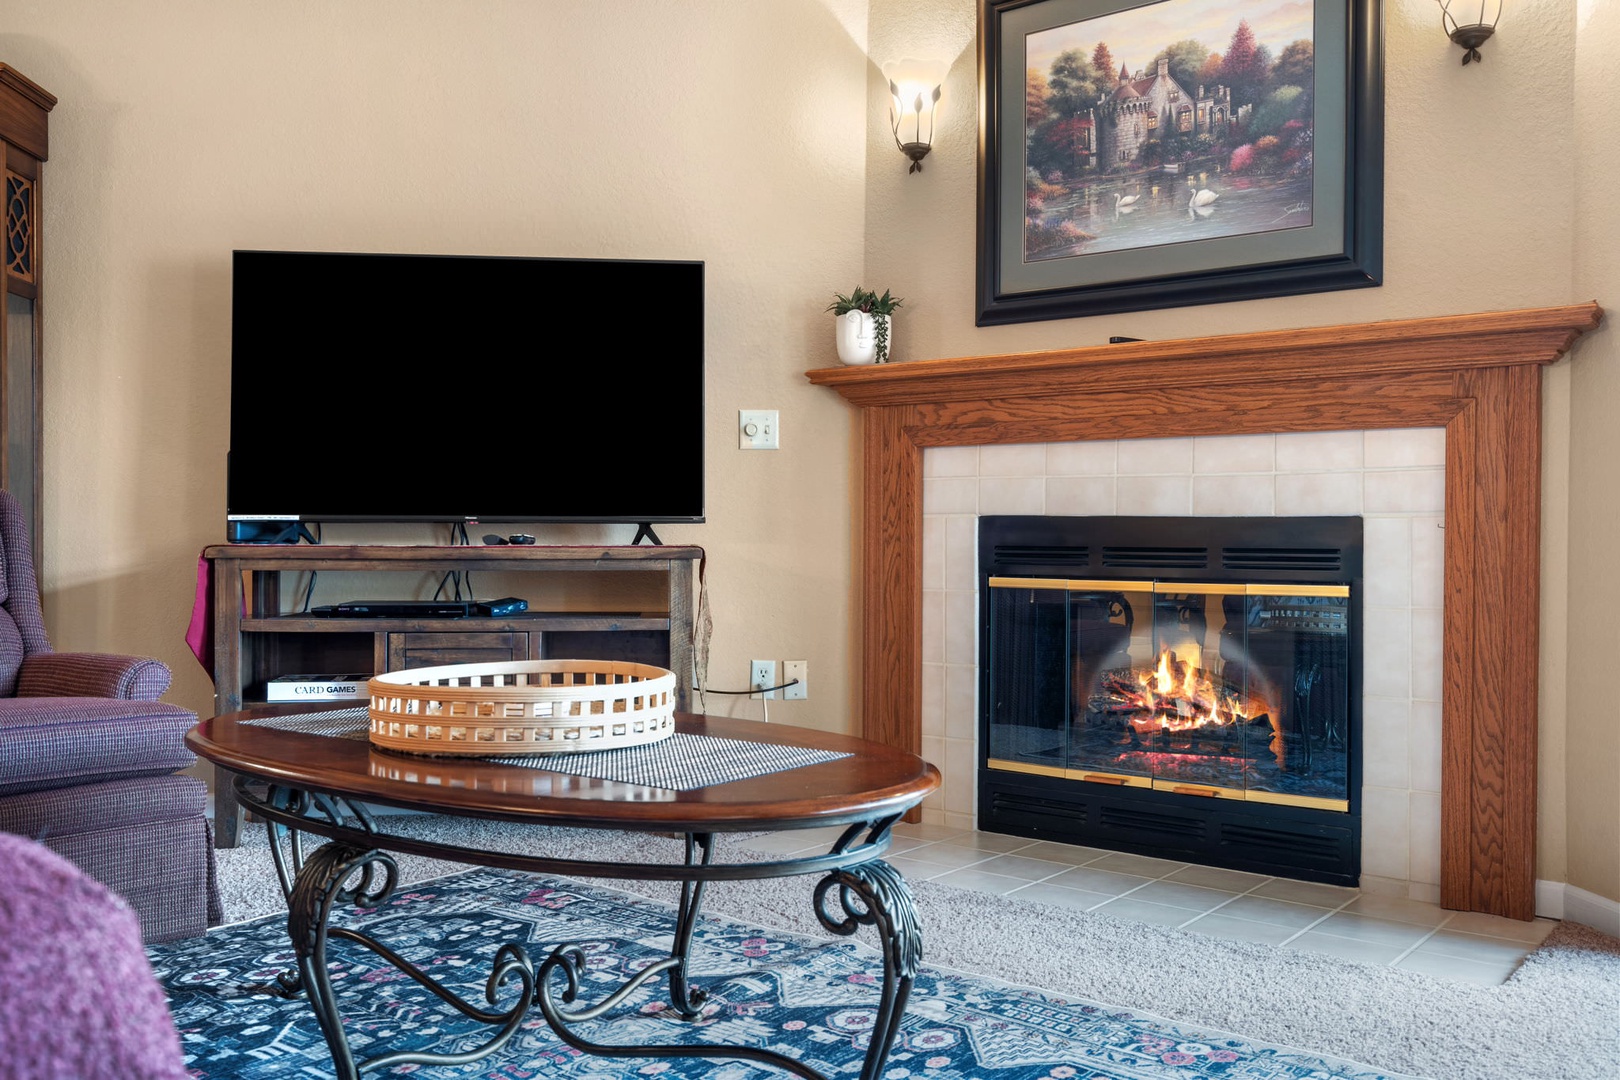 Electric fireplace and TV